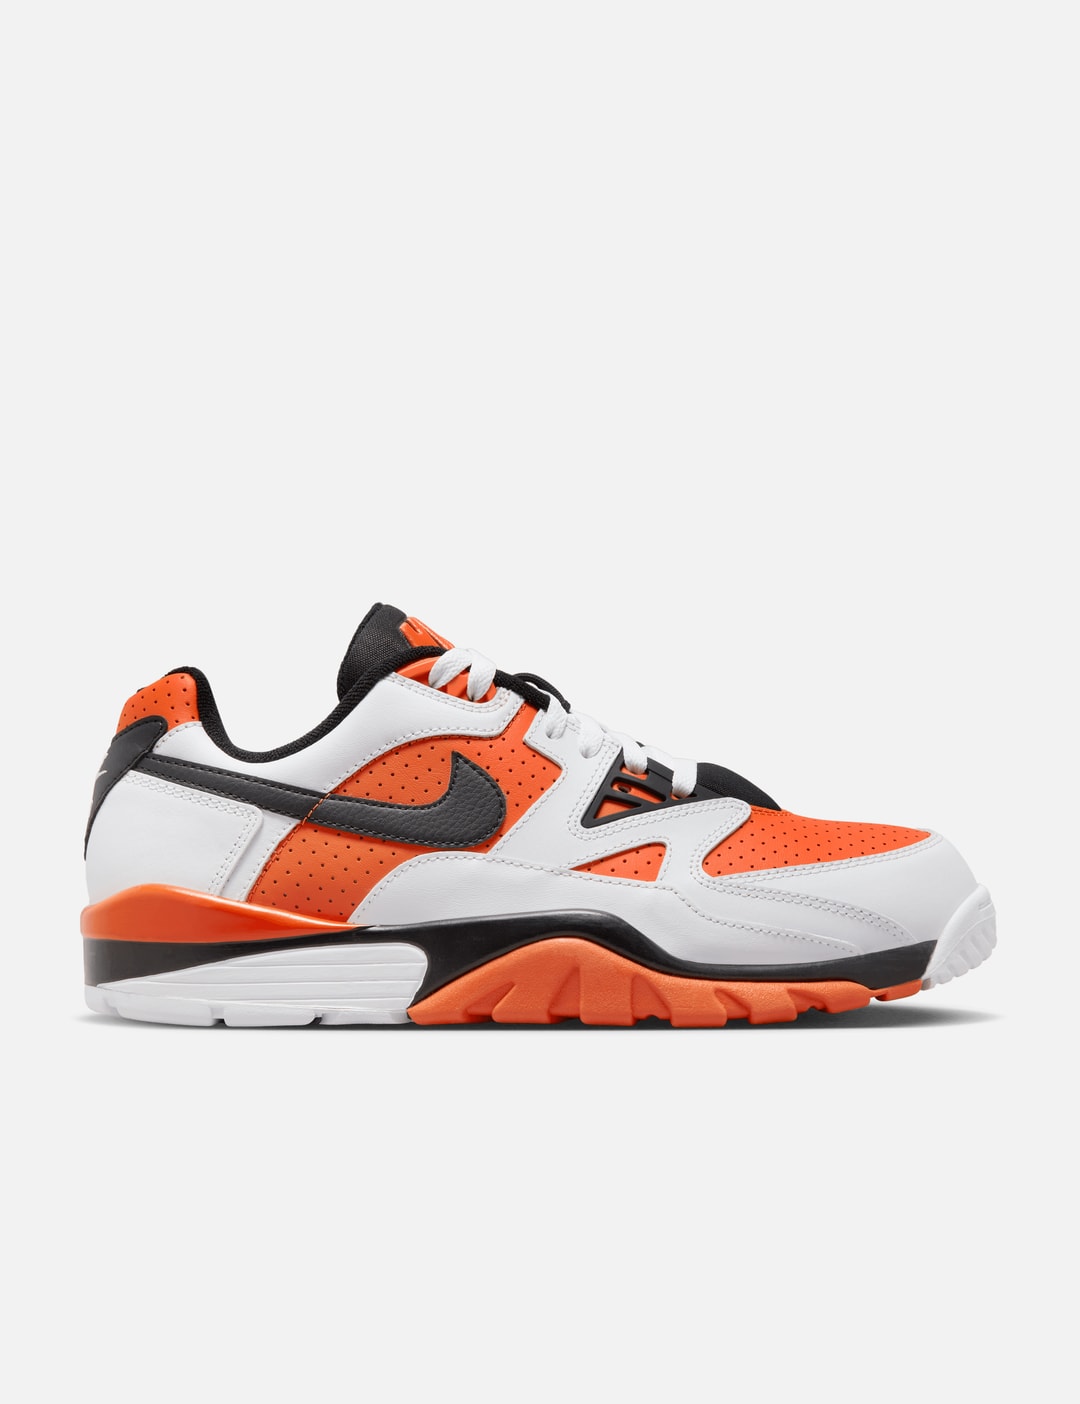 Nike - Nike Air Cross Trainer 3 | HBX - Globally Curated Fashion and ...